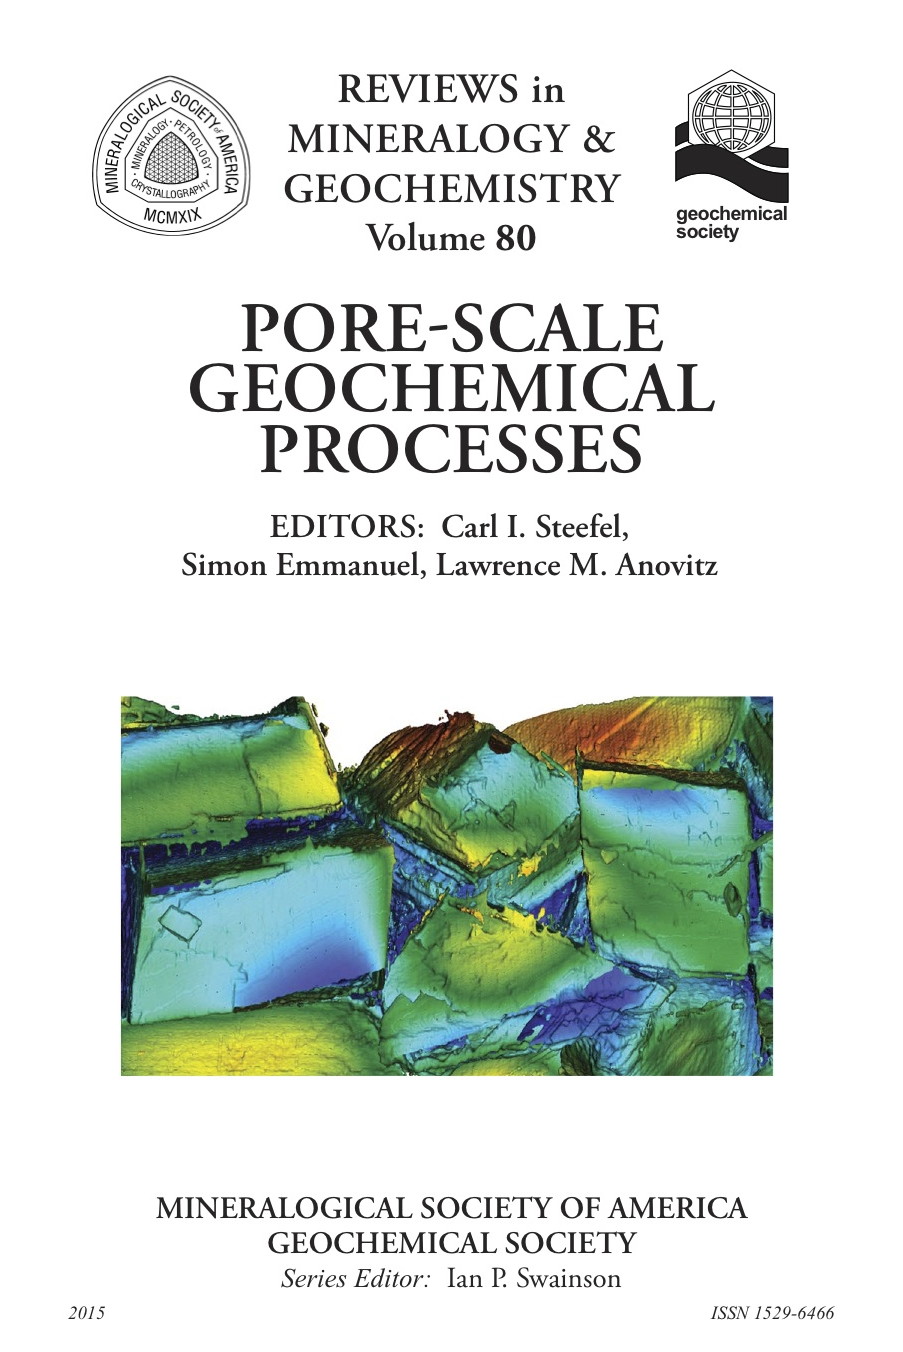 Front Cover of Reviews in Mineralogy and Geochmistry vol 80